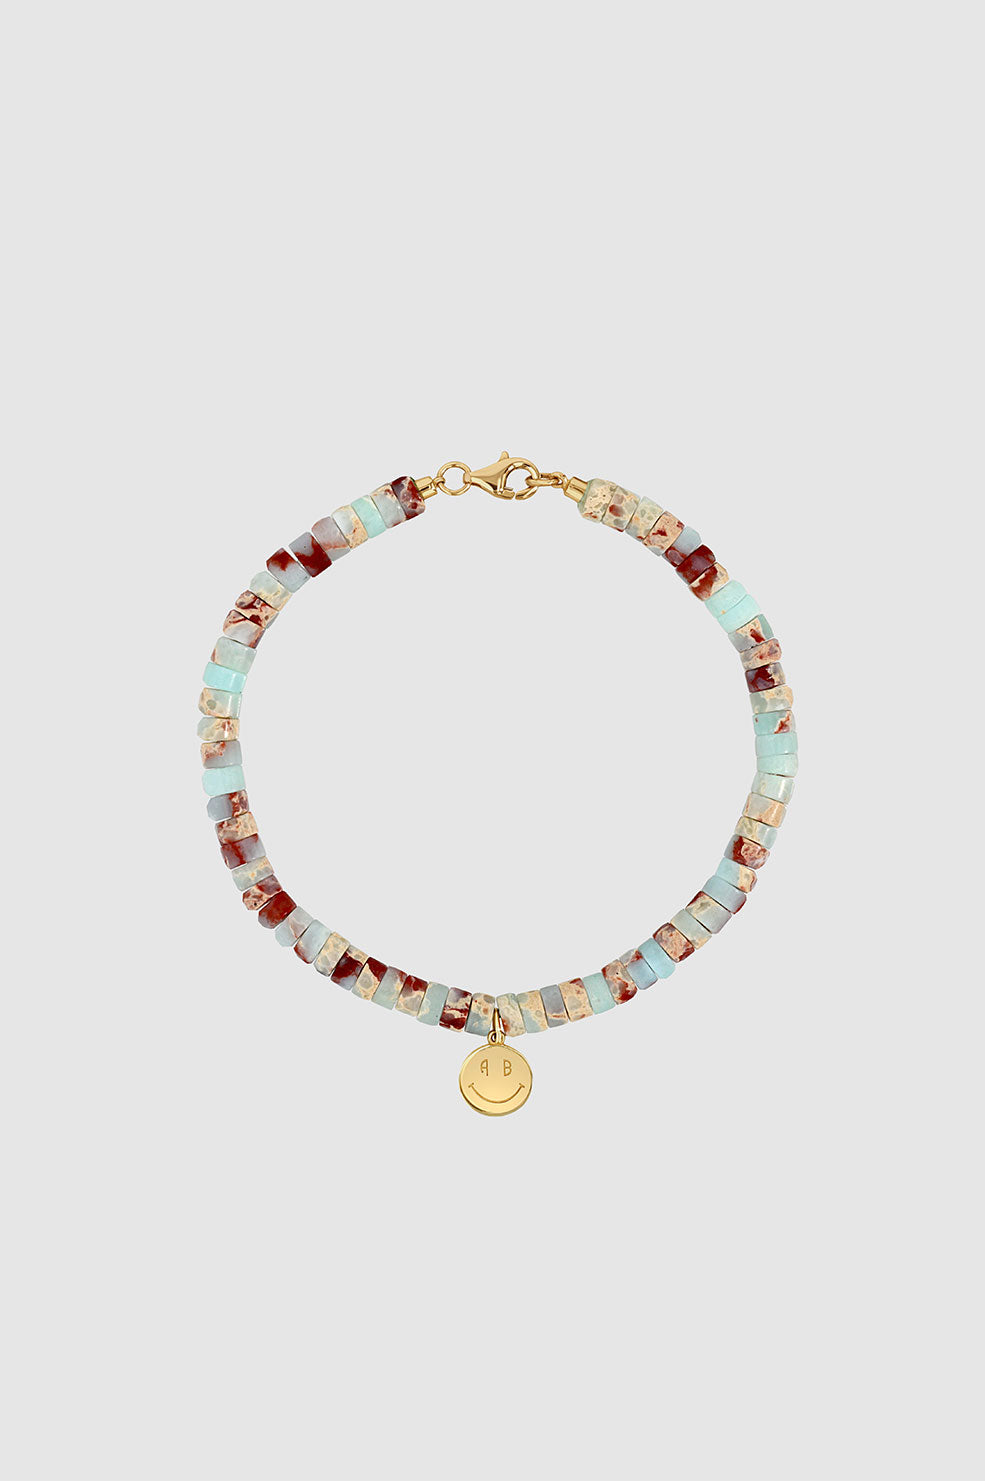 ANINE BING Bead Bracelet With Smile Charm in 14k Gold